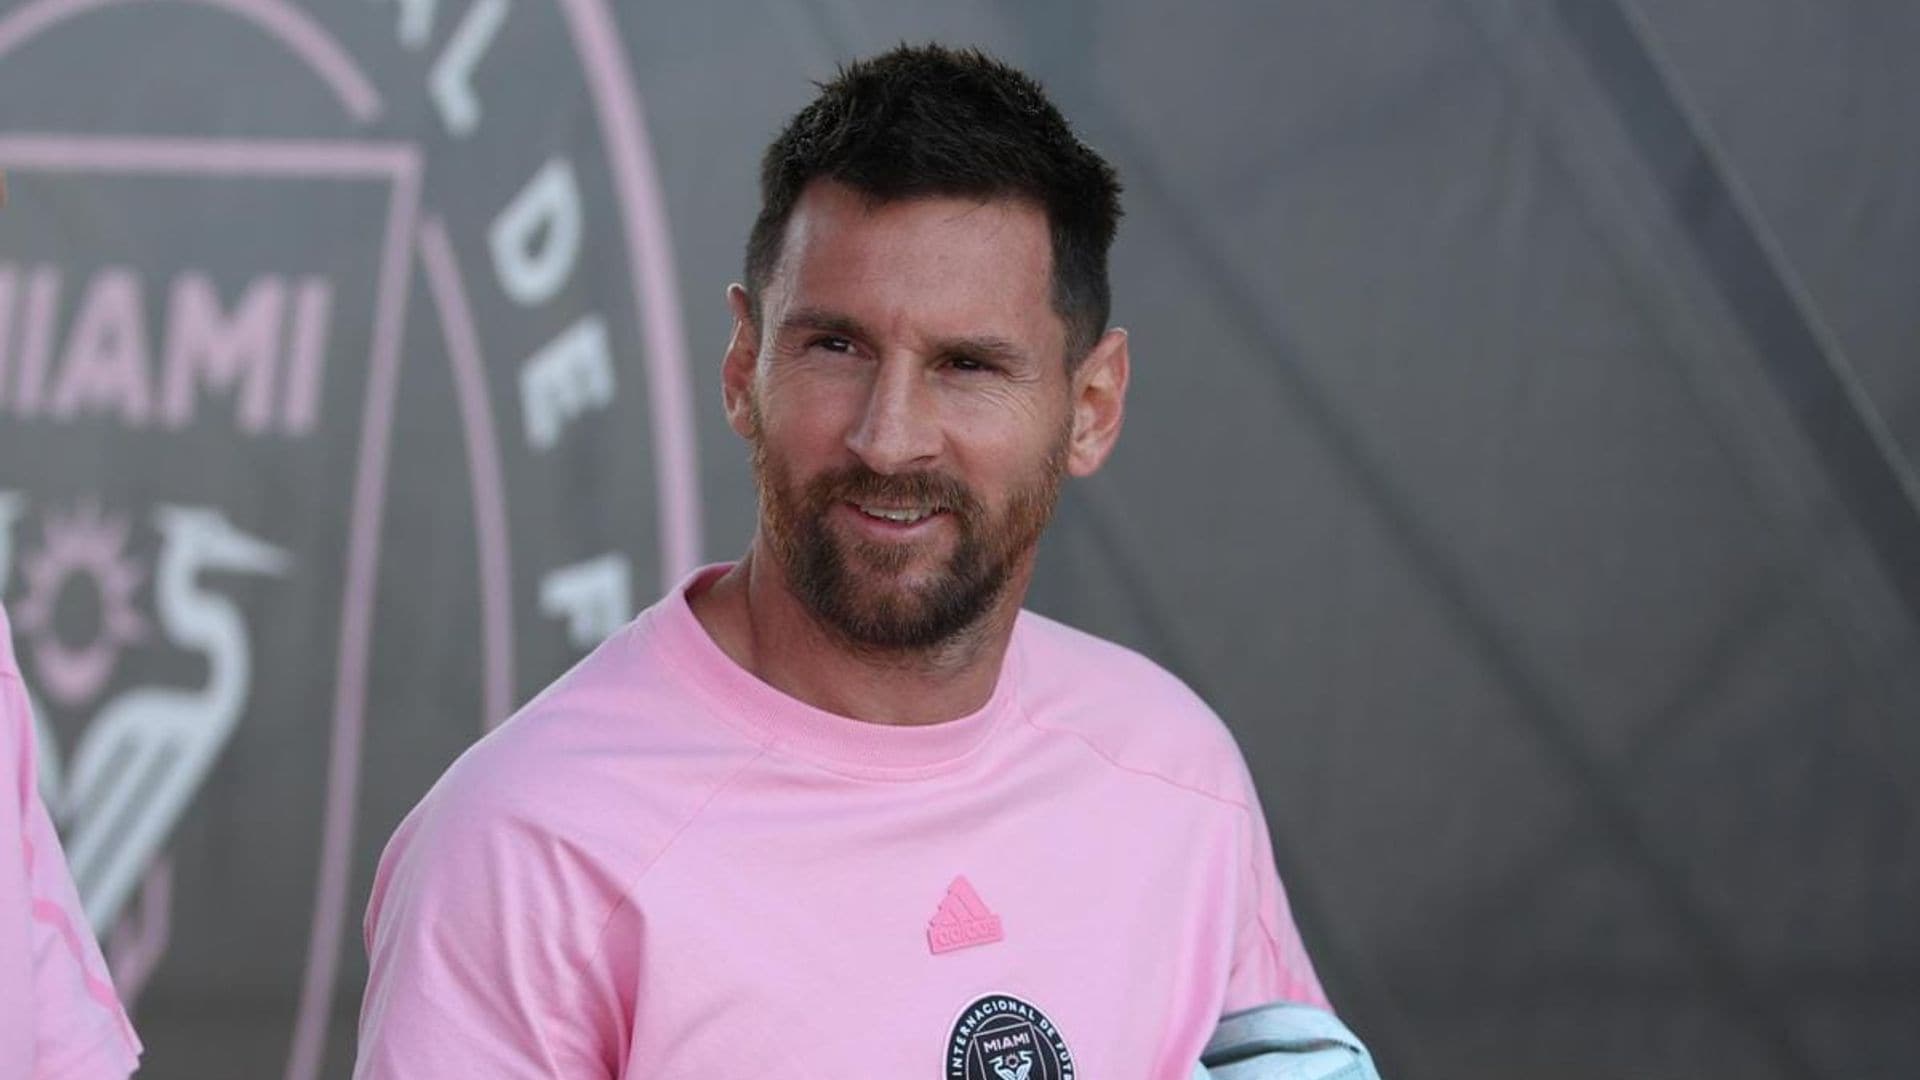 Messi’s brief but memorable English ‘Bad Boys’ ad has gone viral